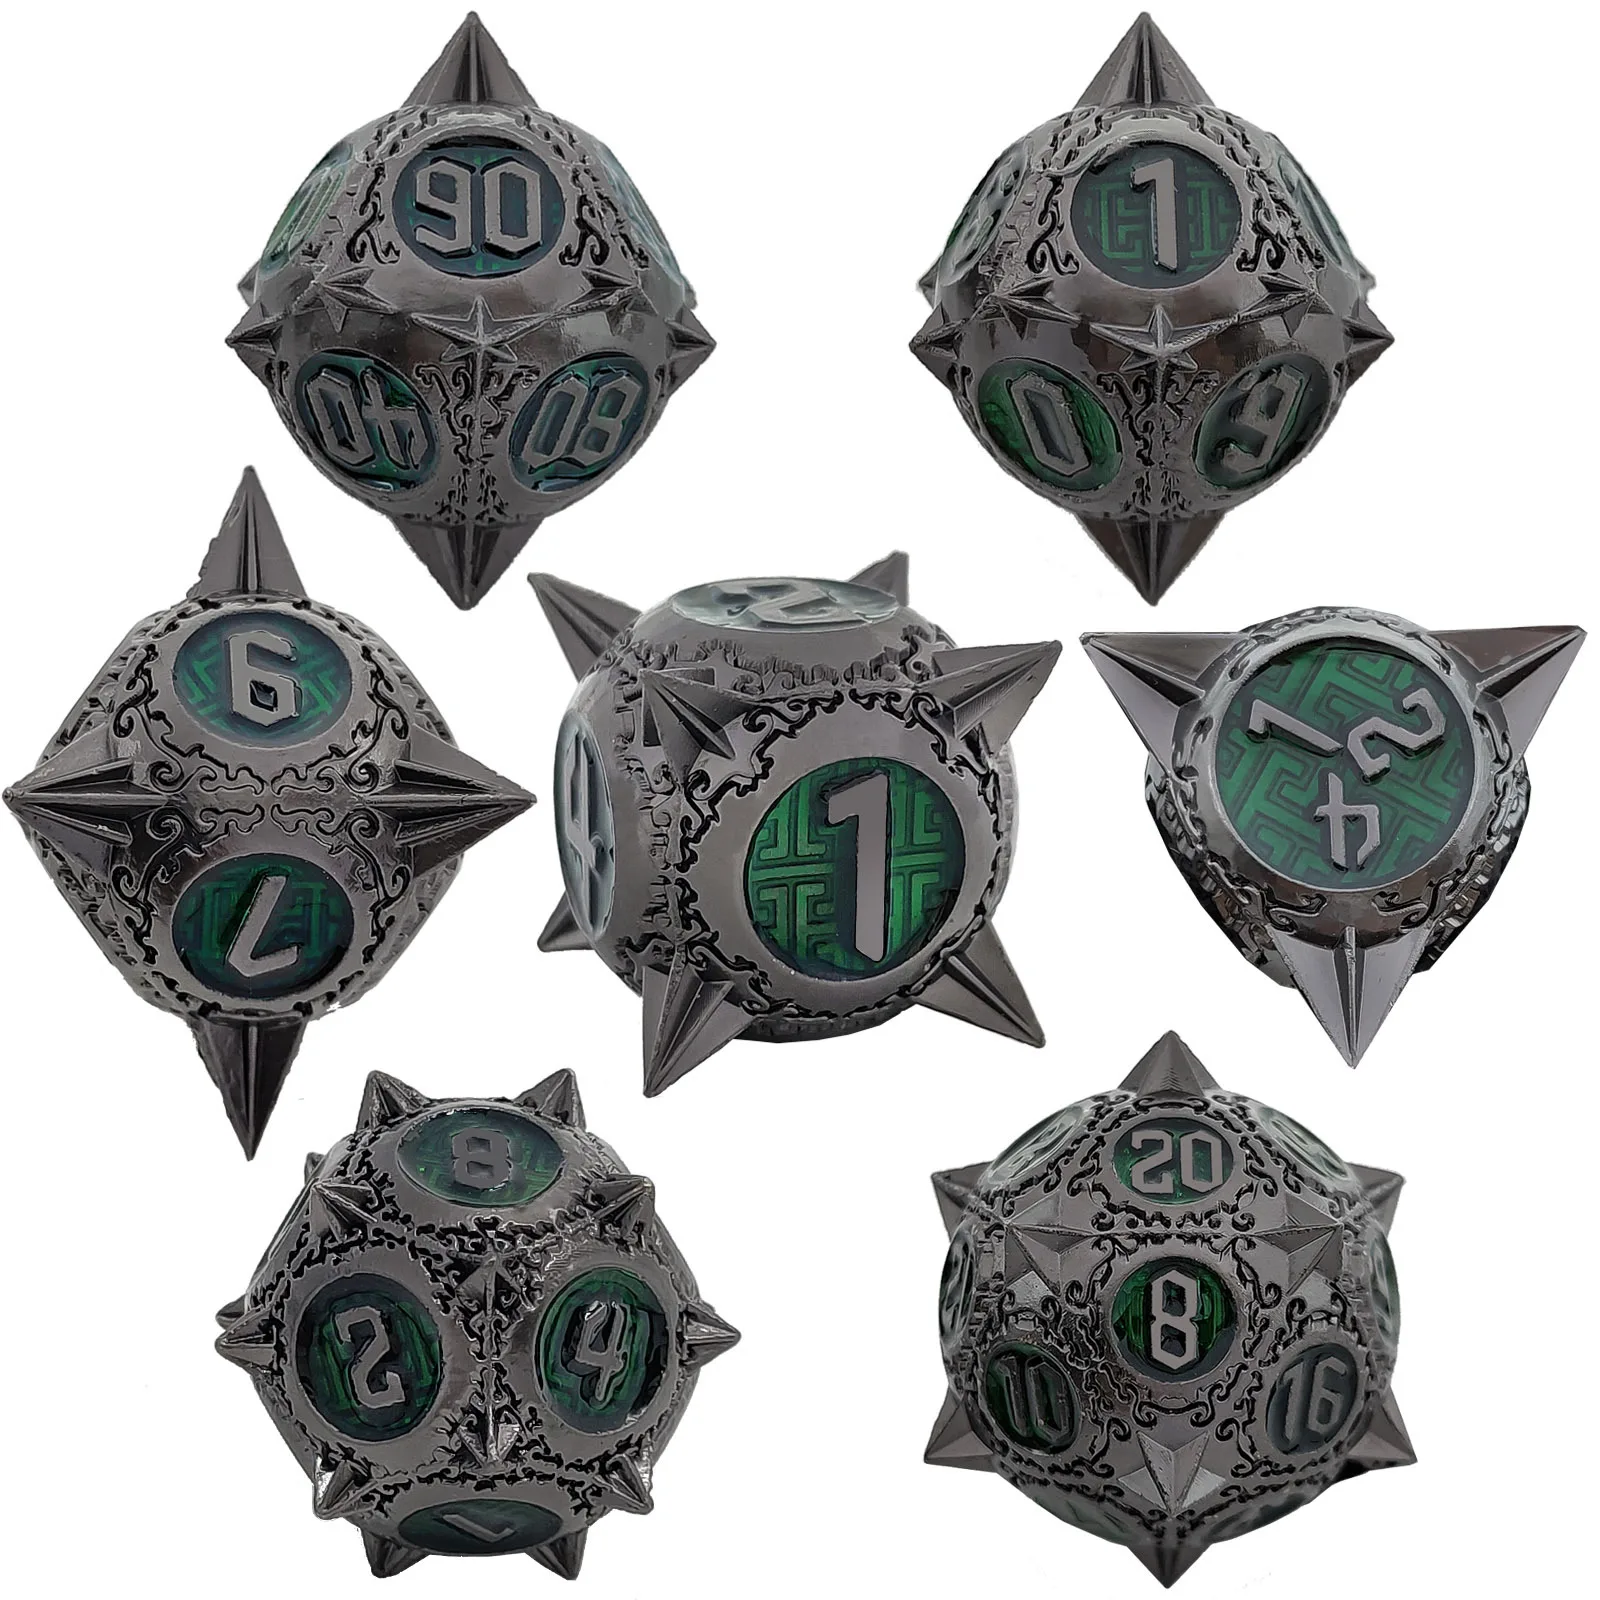 

7Pcs/Set Metal For DND Dice D&D D4 D6 D8 D10 D% D12 D20 Polyhedral Games Dice Set For Dungeons And Dragons Table Games MTG RPG